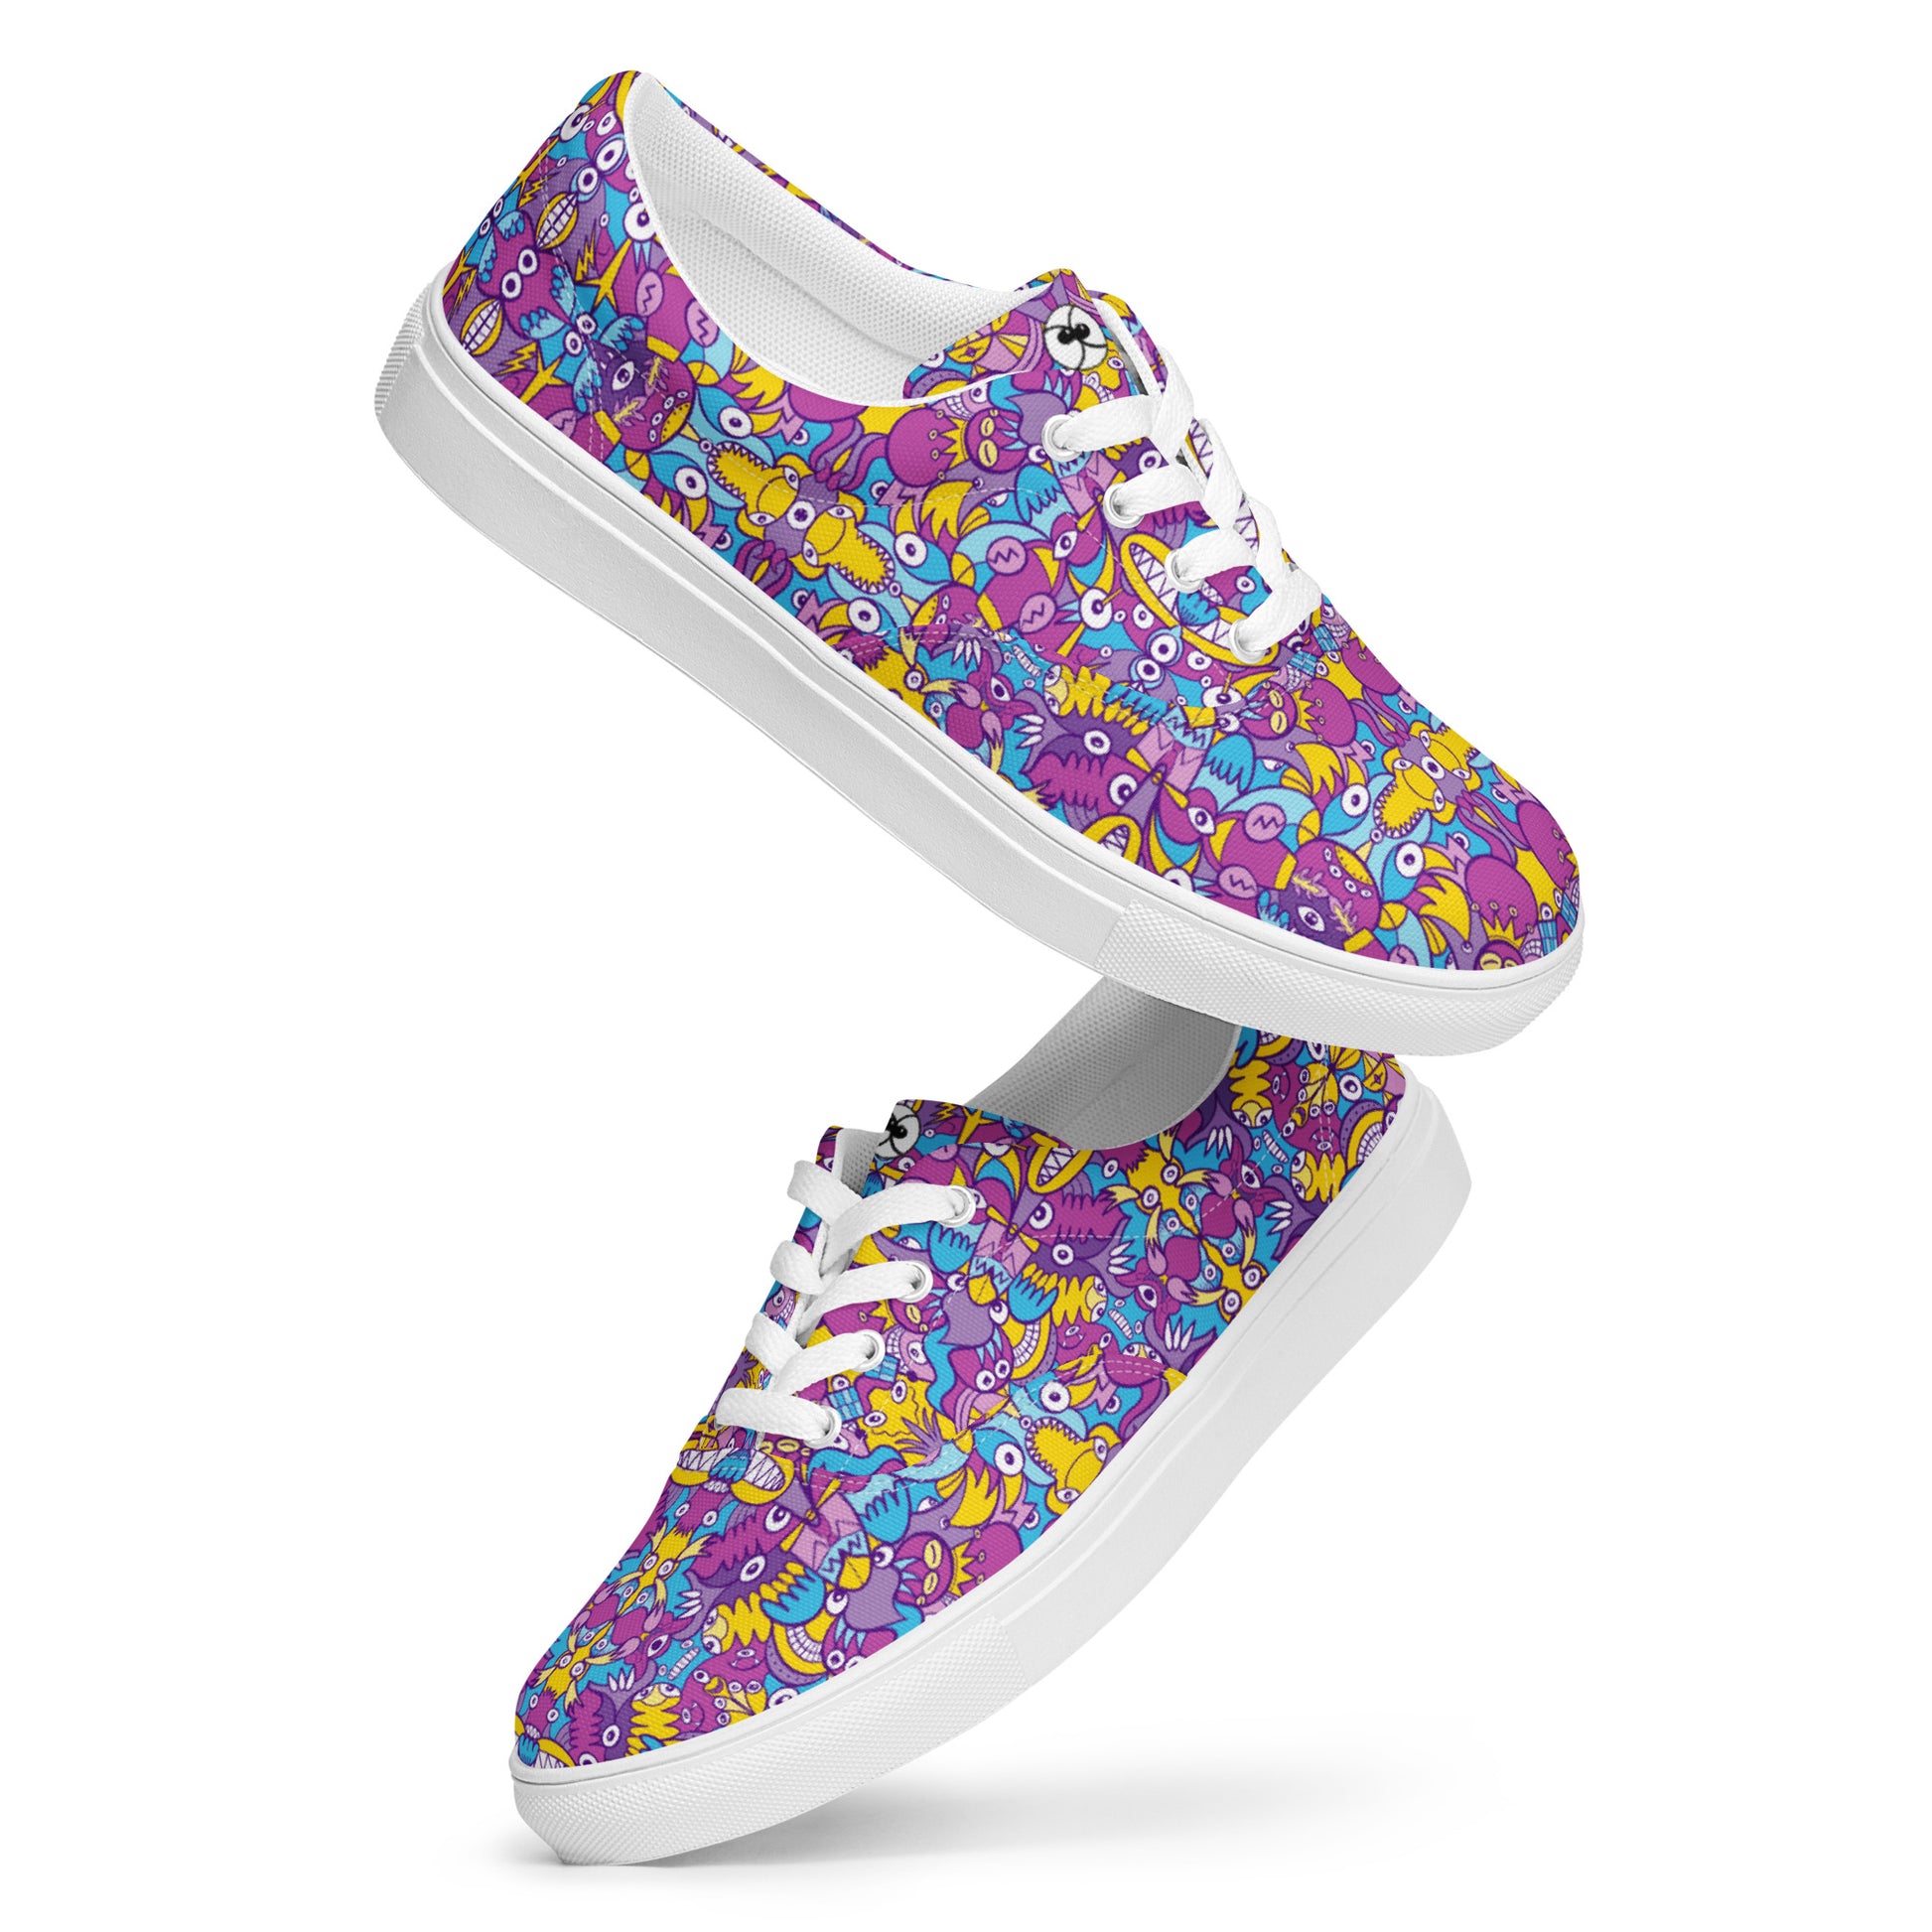 Doodle art compulsion is out of control Women’s lace-up canvas shoes. Playing with shoes